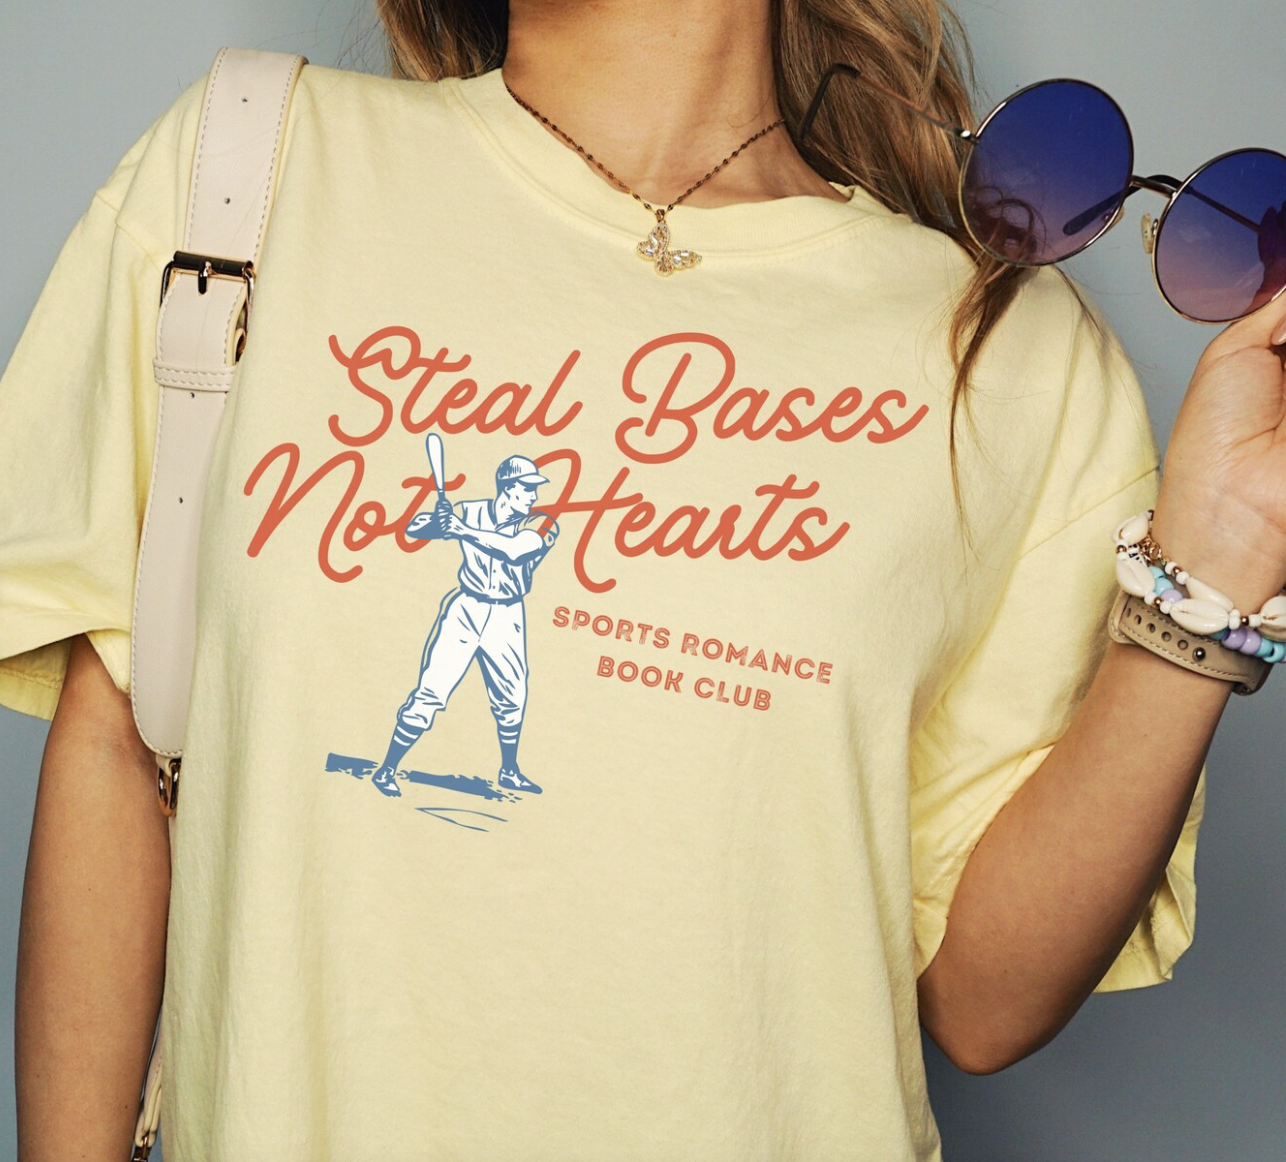 photo of a yellow t-shirt with a baseball player illustration and "steal bases, not hearts - sports romance book club" screen printed on it